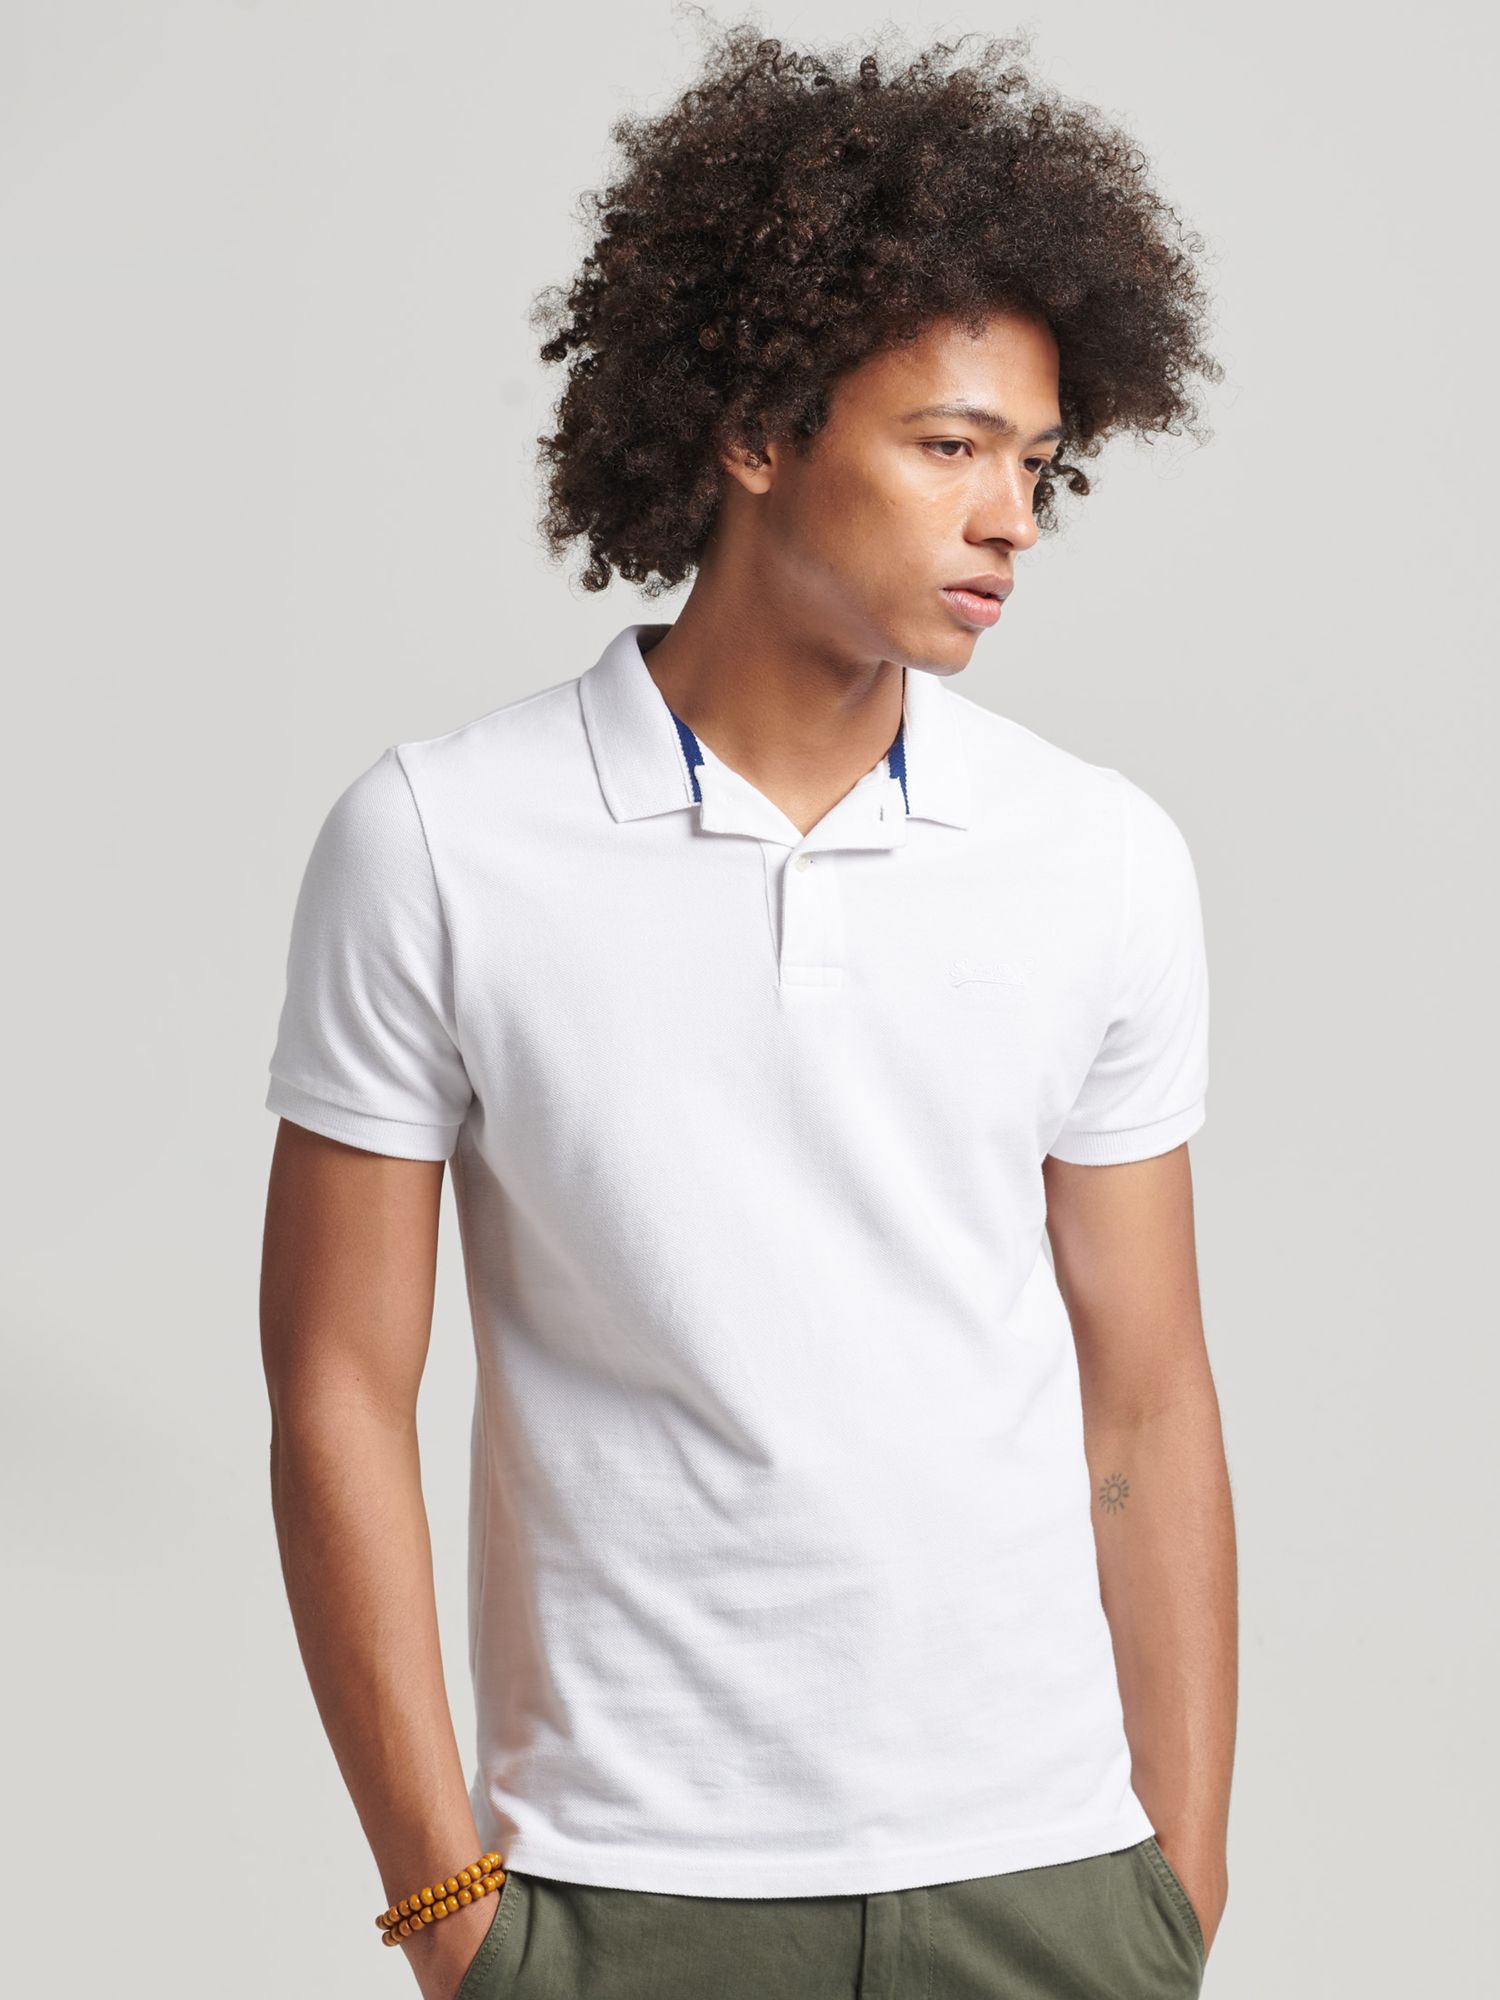 & Partners Classic Polo John at Pique Superdry Optic Lewis Shirt,